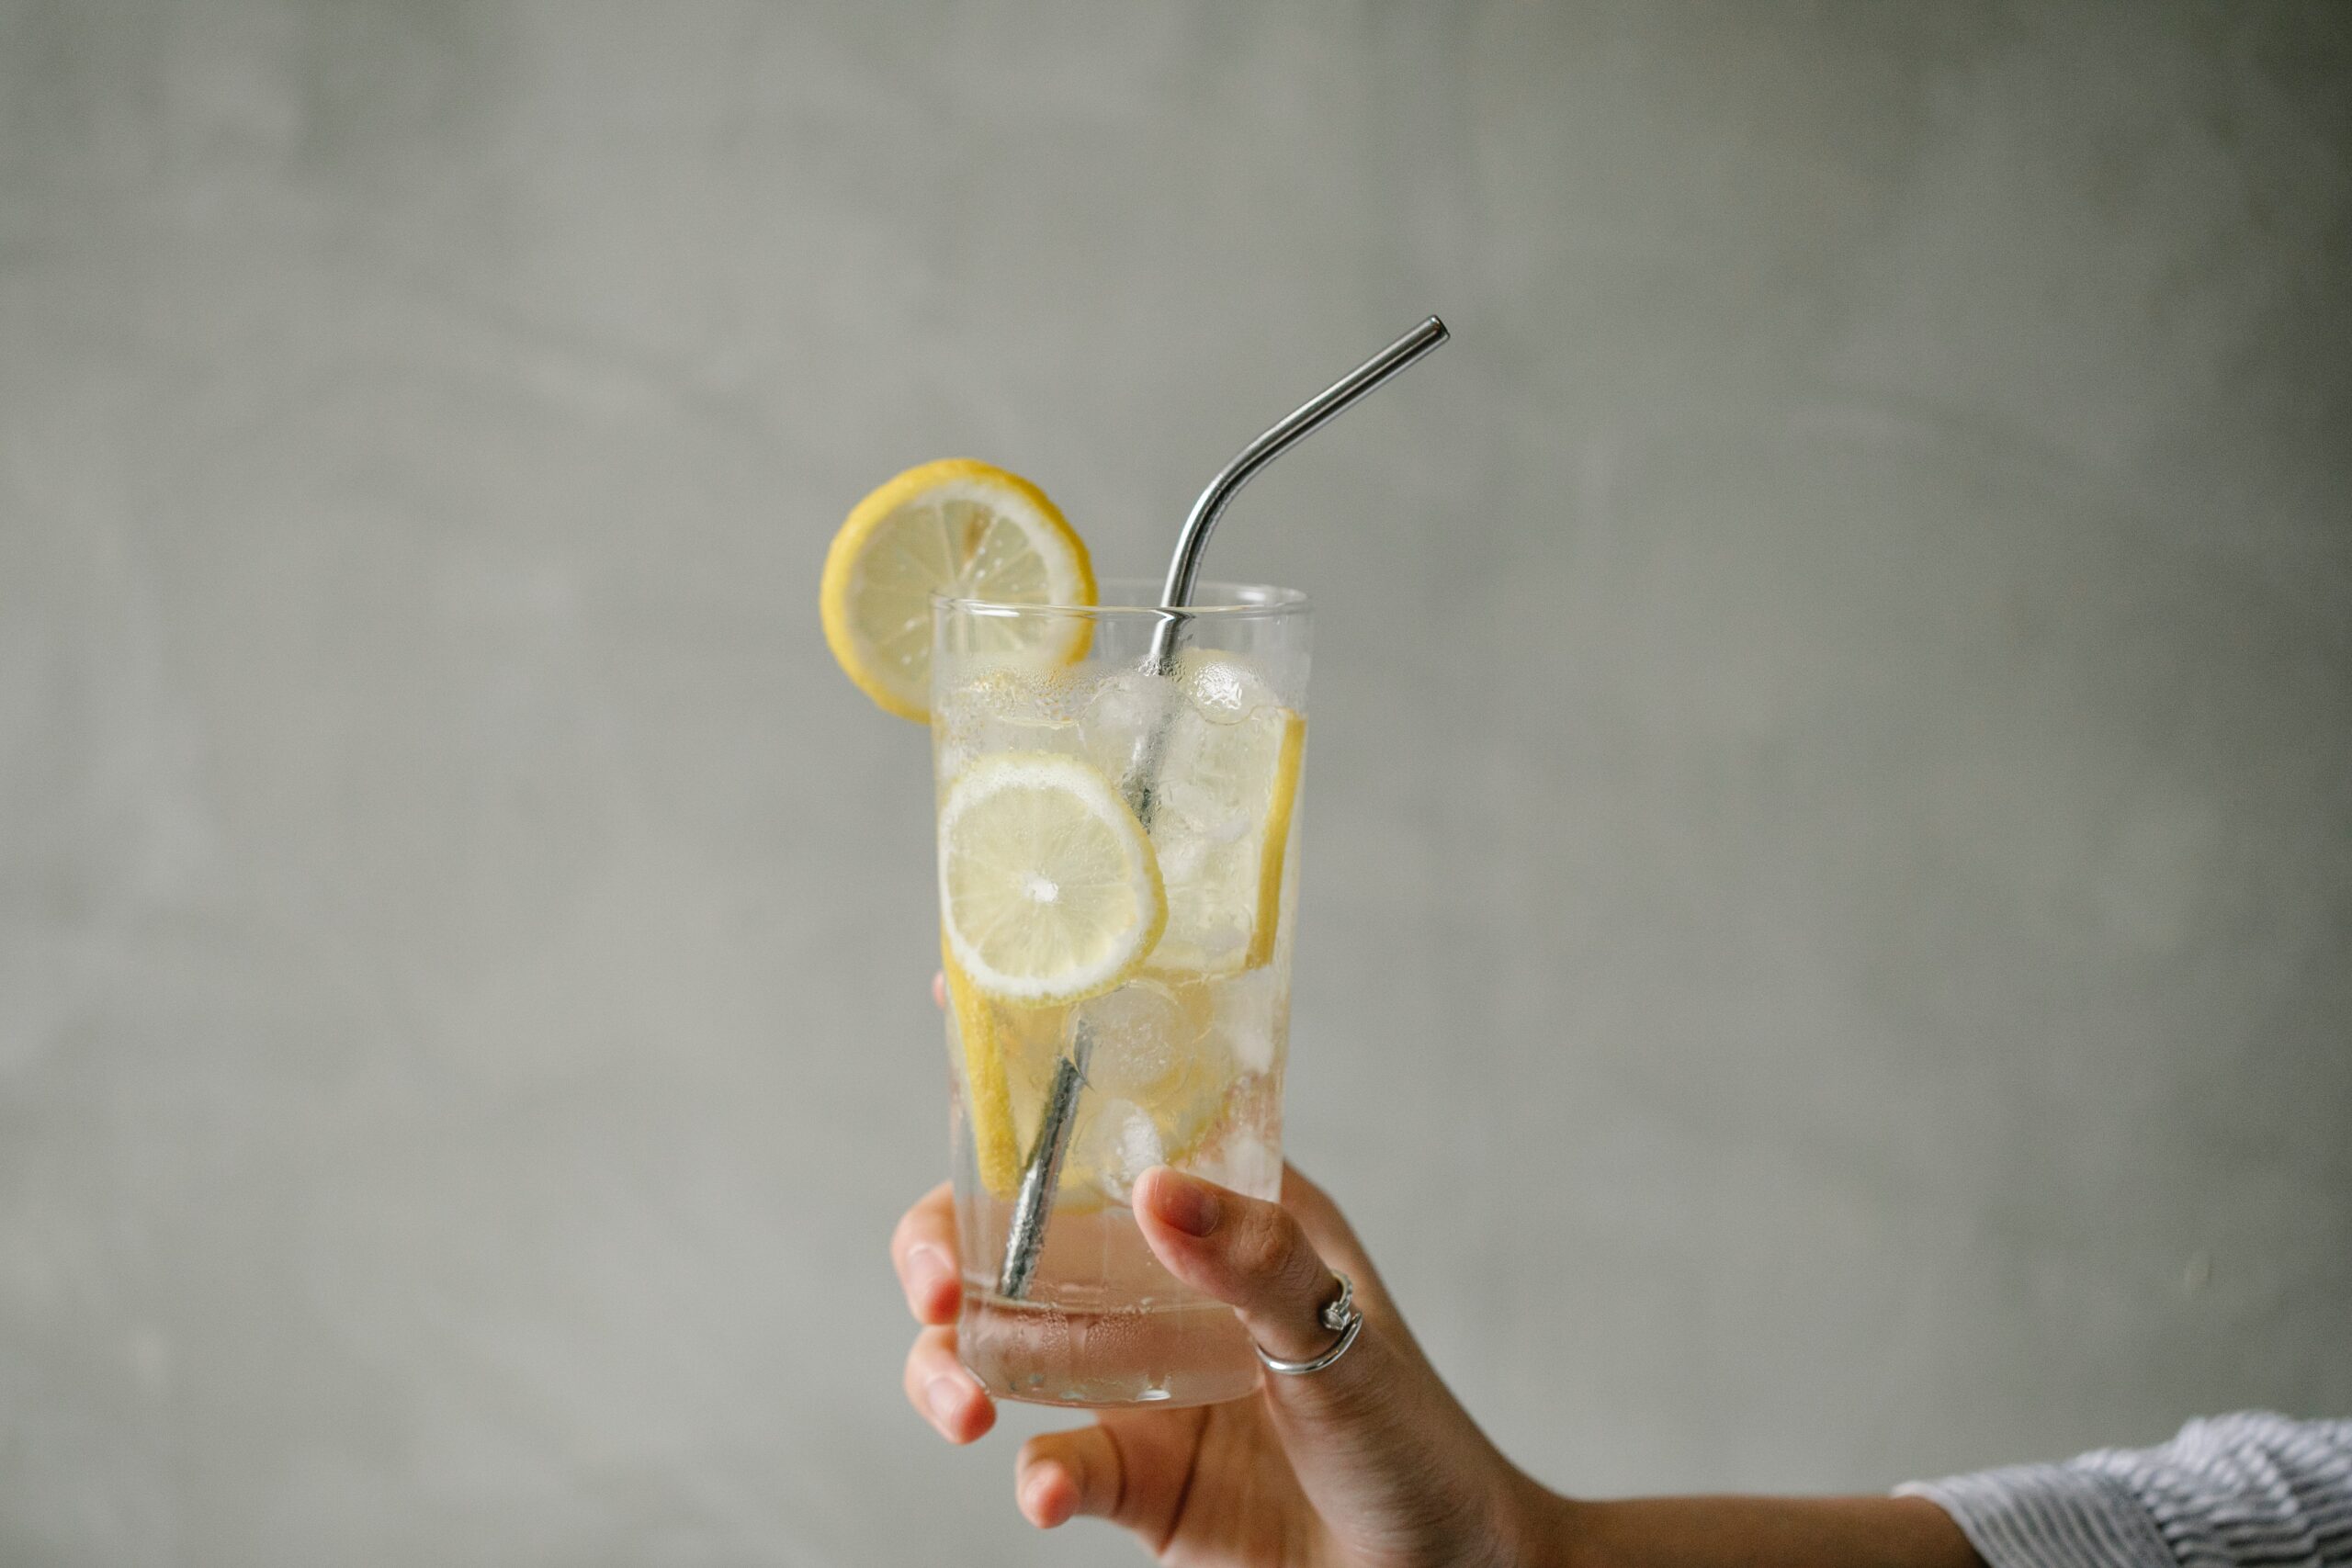 An Explanation of P/E with a Glass of Lemonade Relief